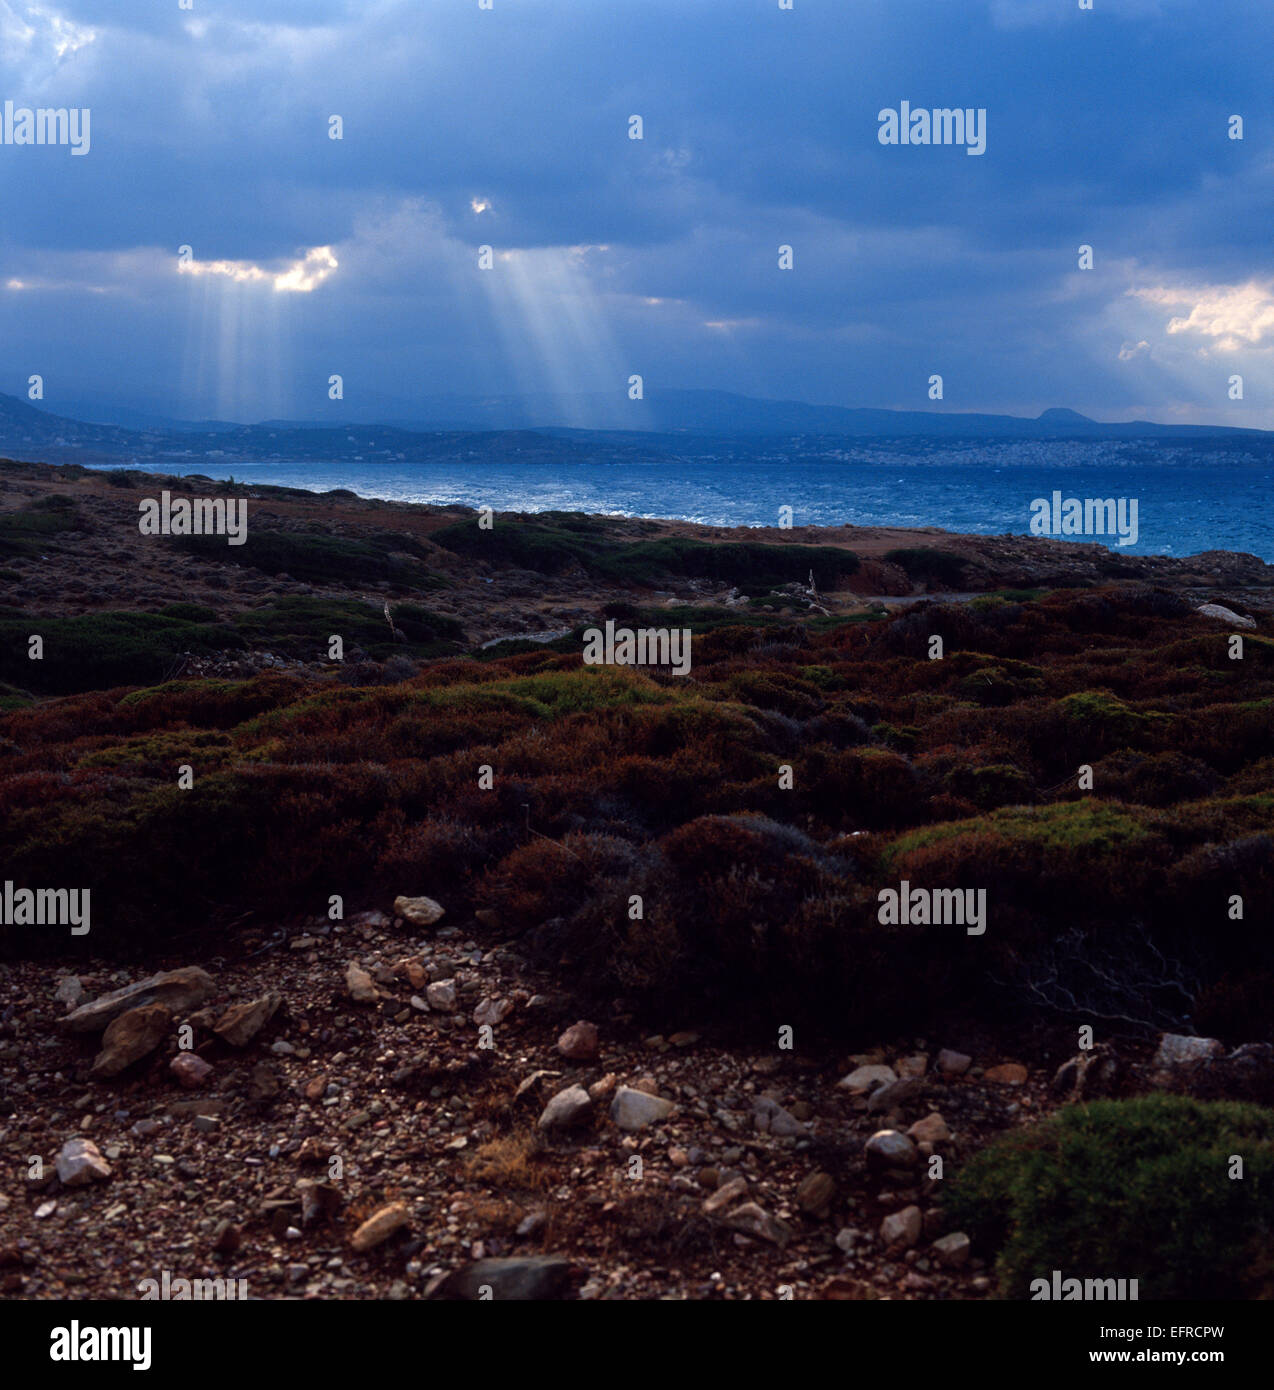 Sunrays from clouds in Sitia bay Stock Photo